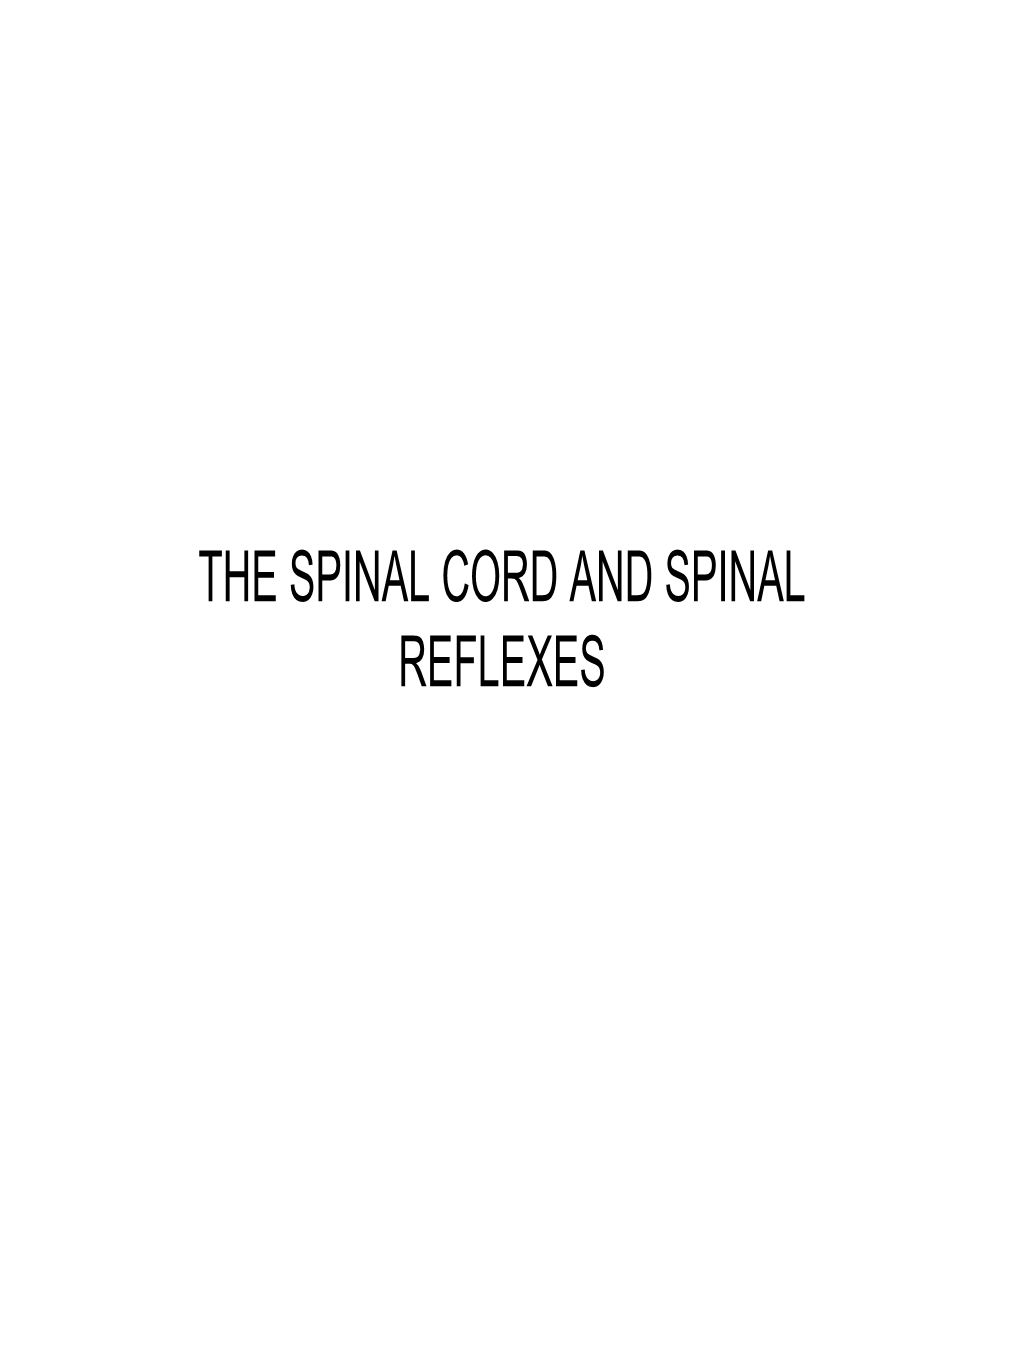 The Spinal Cord and Spinal Reflexes